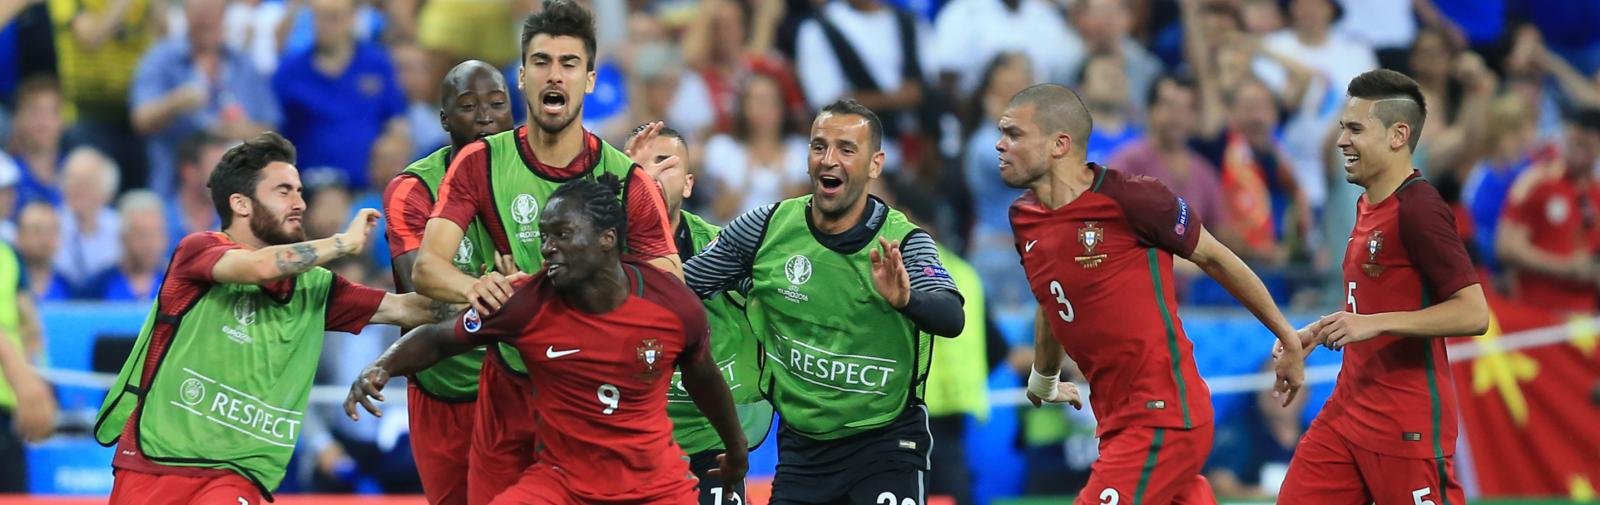 5 things we learned as Portugal beat France to win the EURO 2016 final